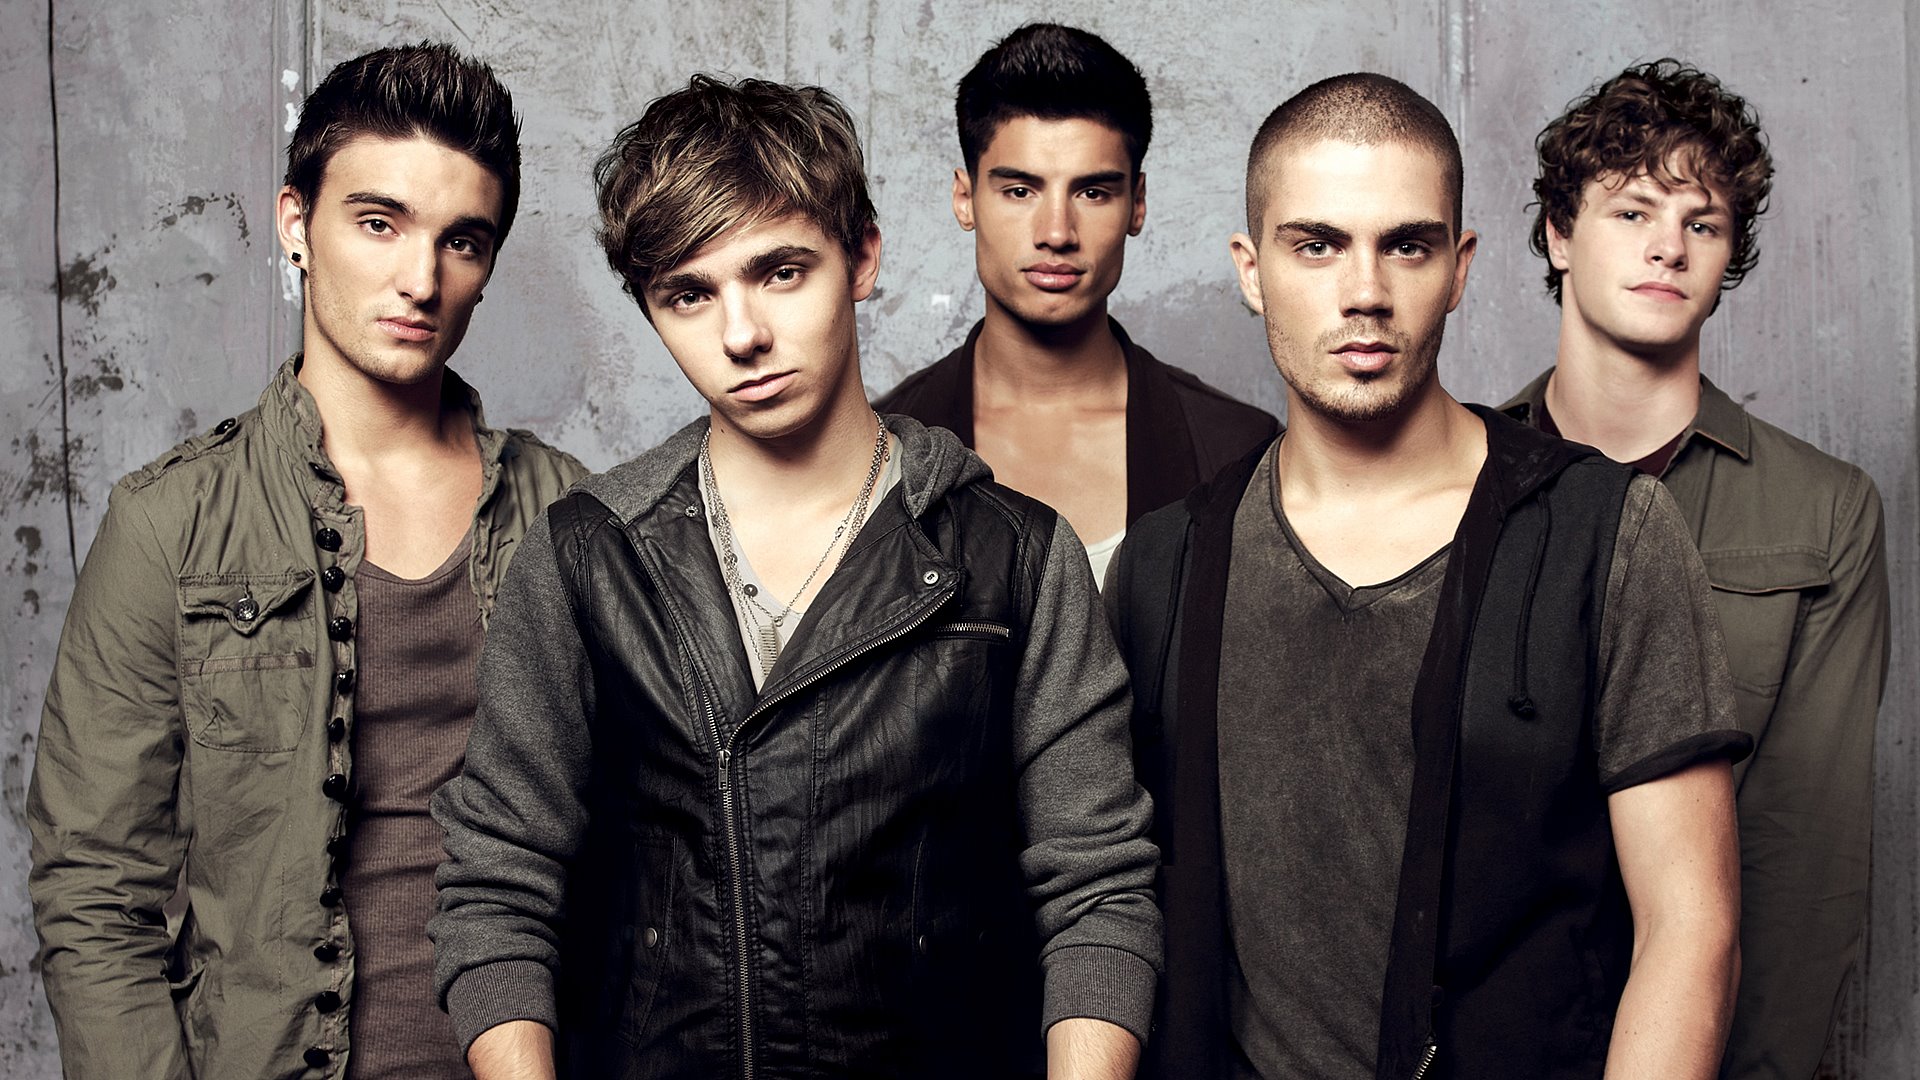 Boy Band Pop Music The Wanted 1920x1080